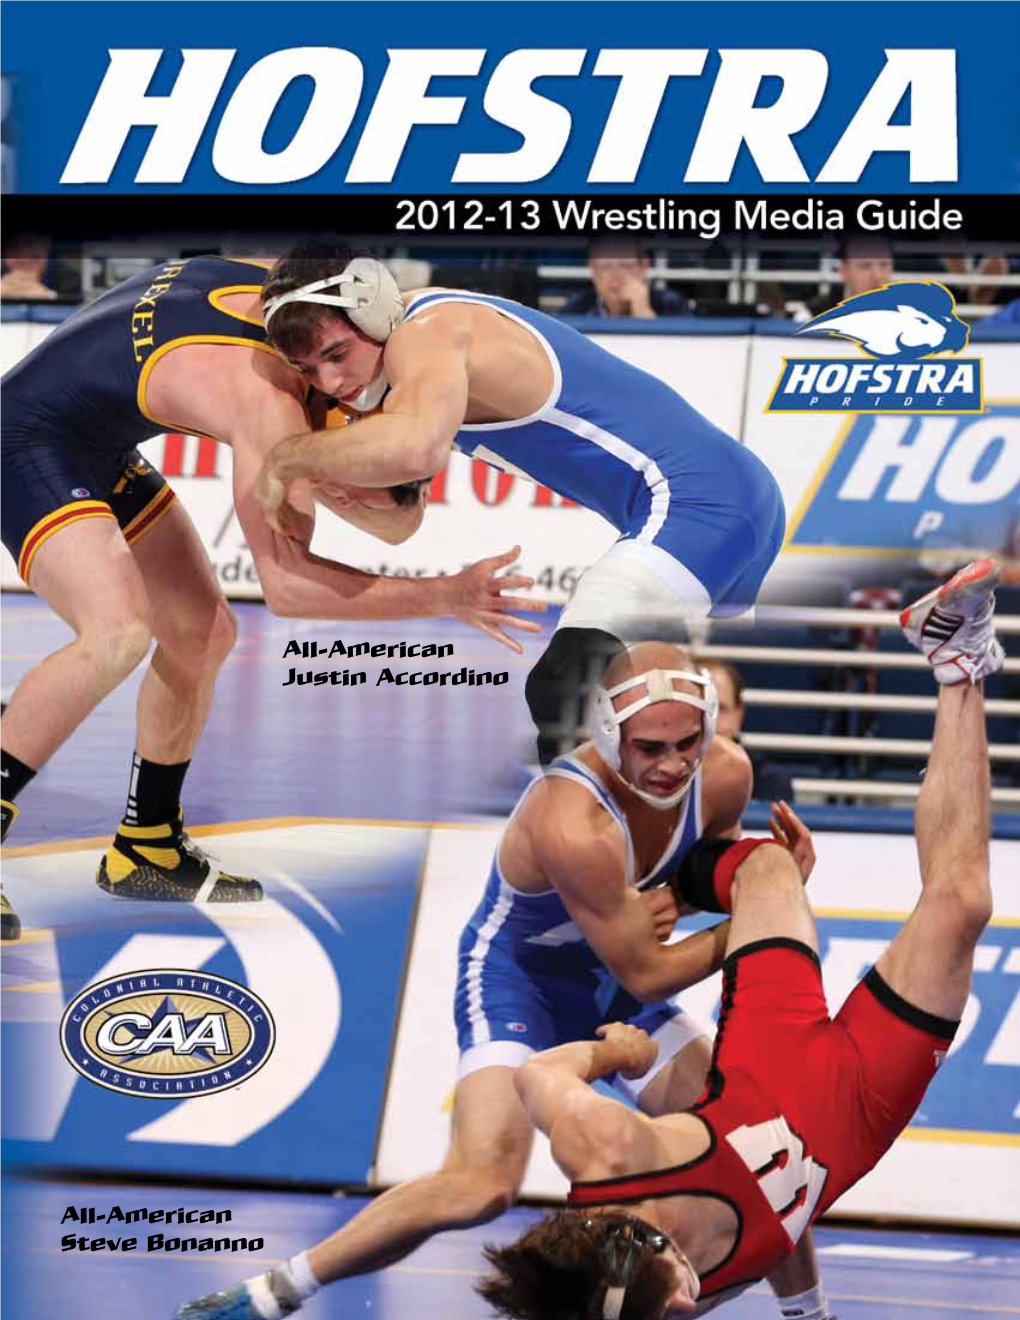 2012-13 Wrestling Quick Facts/Table of Contents